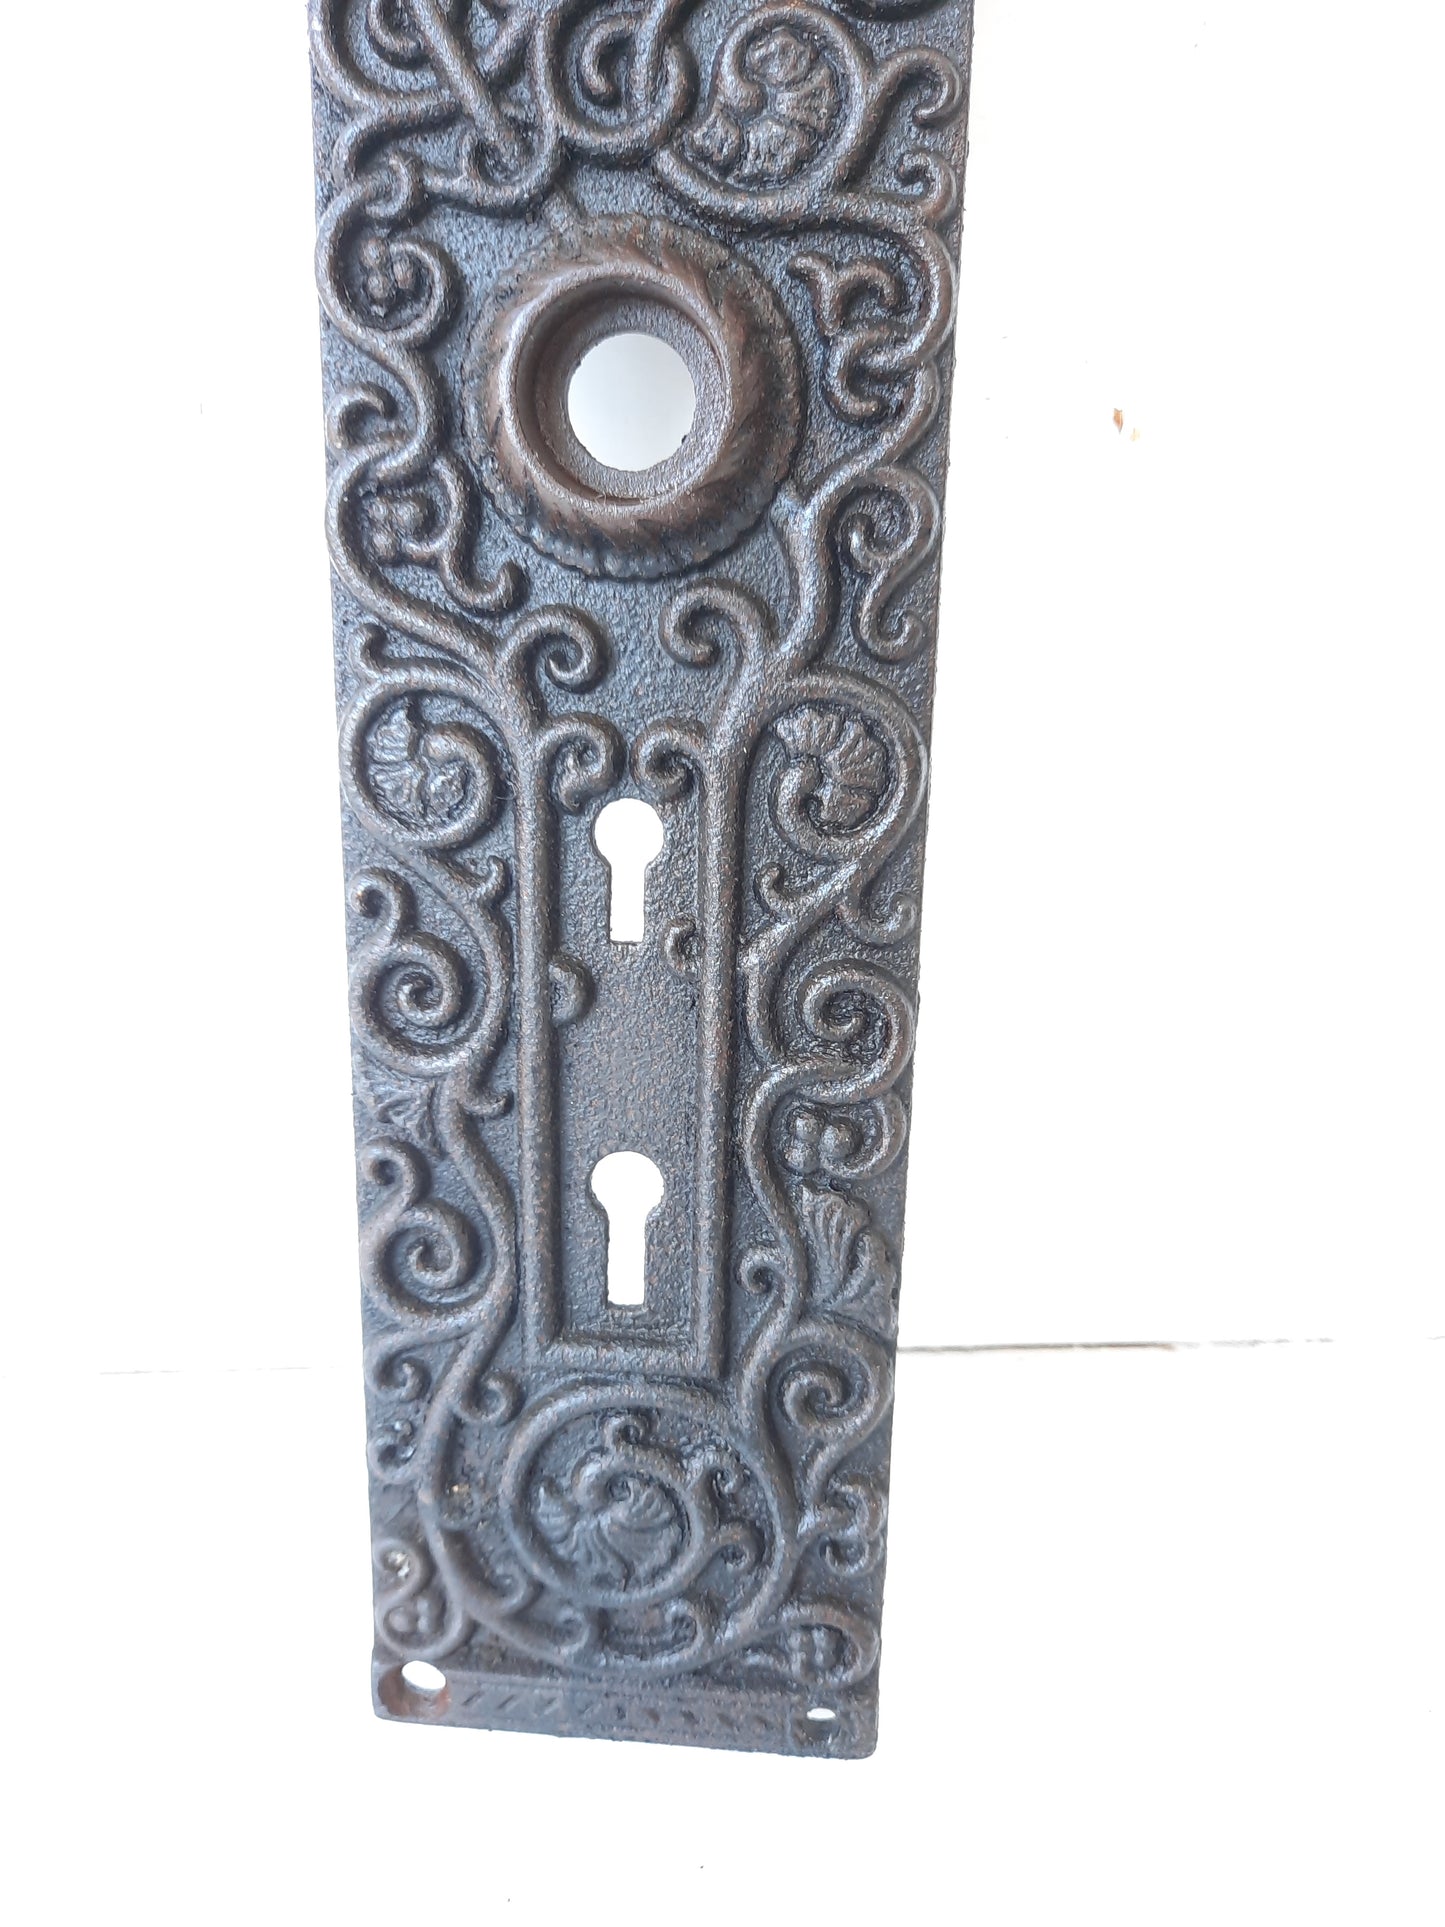 Large Antique Iron Entry Backplate, Ornate Double Keyhole Front Door Plate 080102